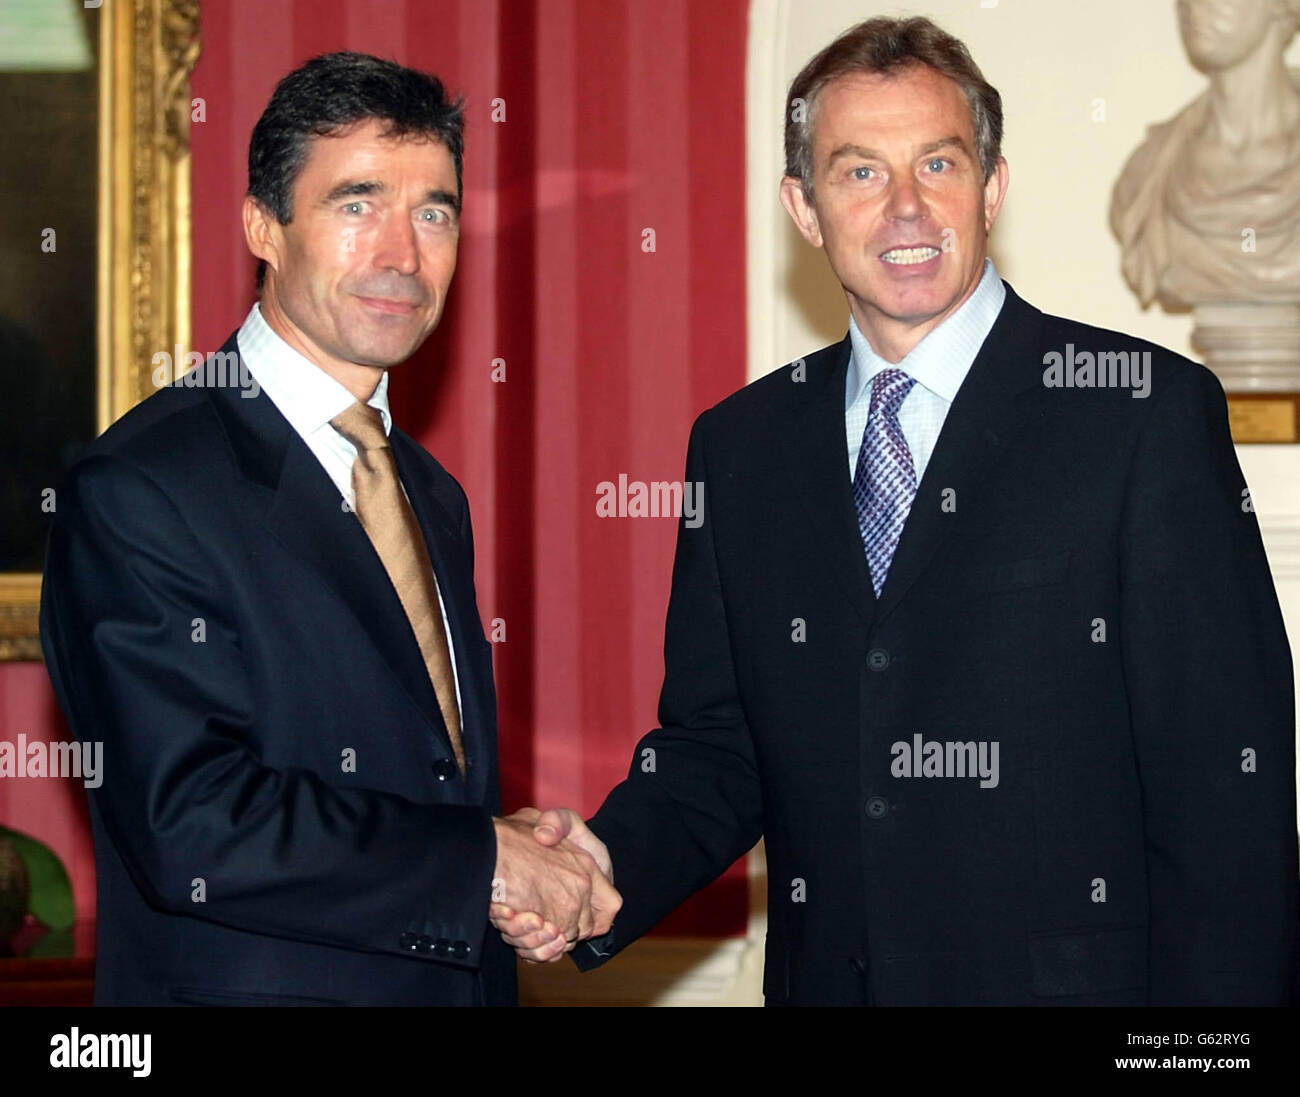 Danish Prime Minister Anders Fogh Rasmussen greeted by British Prime Minister Tony Blair on his arrival by British Prime Minister Tony Blair at No.10 Downing Street, London, for a press conference on Europe and the terrorist attack in Bali. Stock Photo